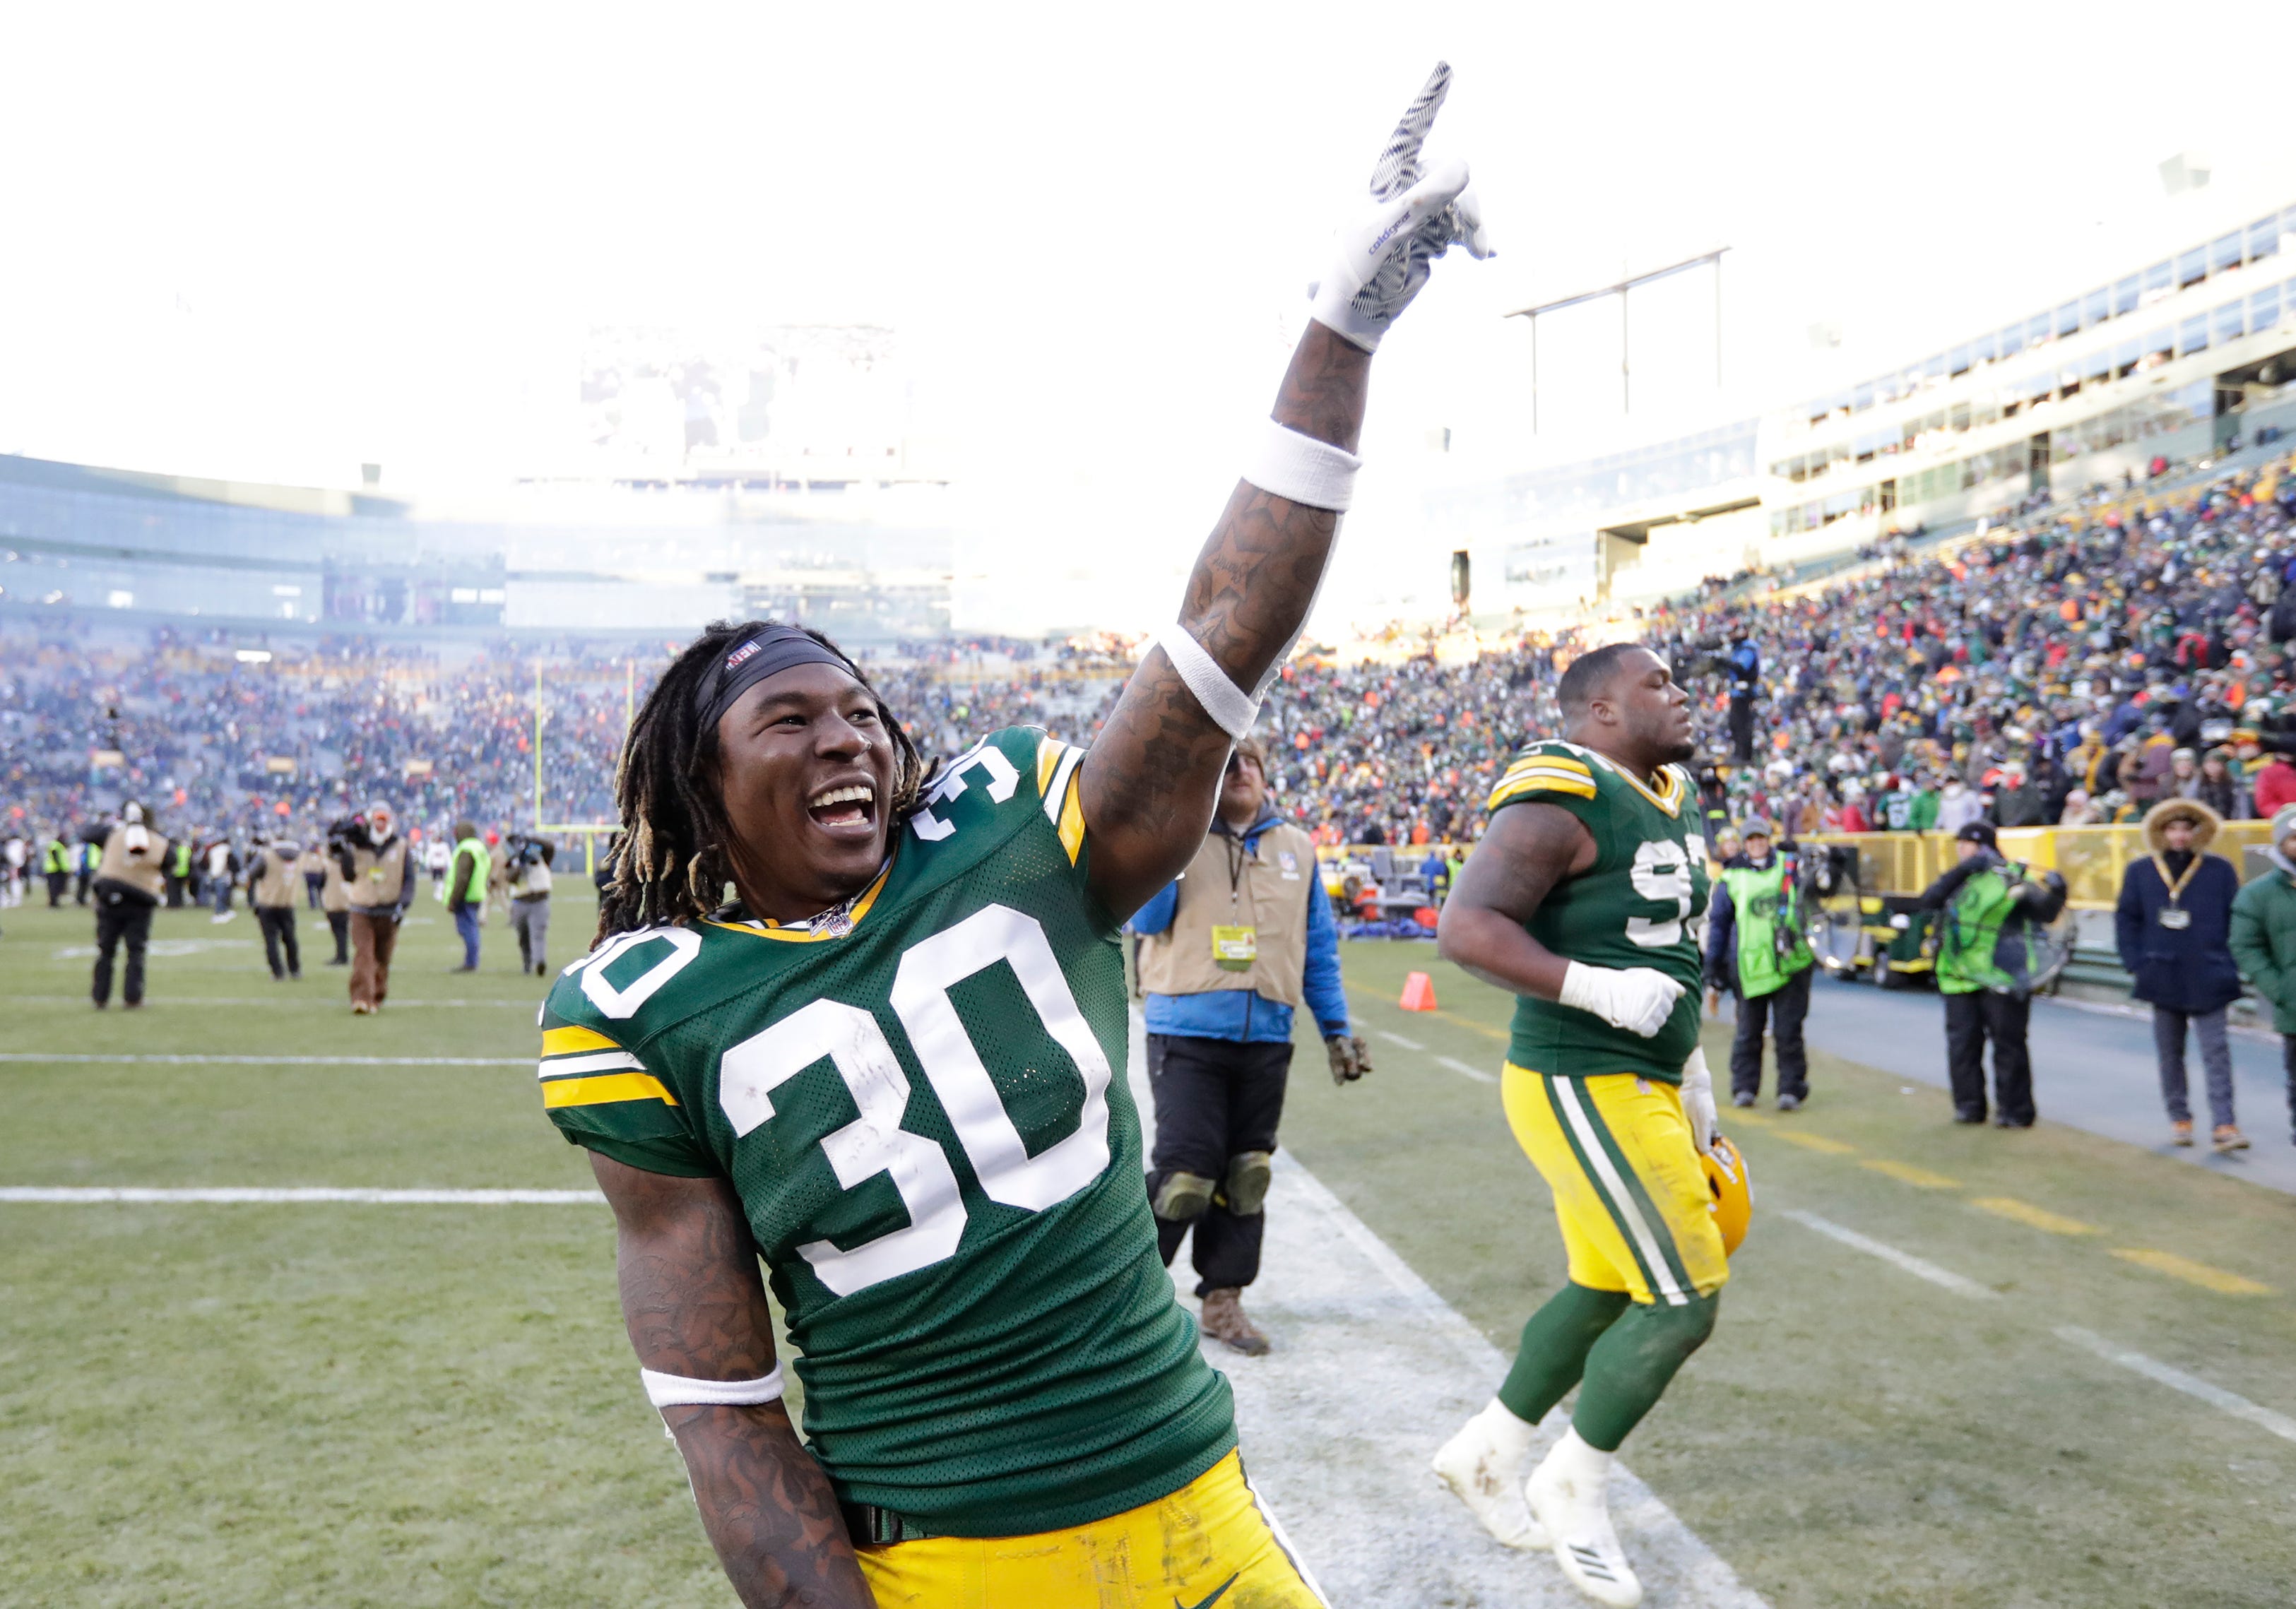 Green Bay Packers running back Jamaal Williams (30) celebrates a victory against the Chicago Bears Sunday, December 15, 2019, at Lambeau Field in Green Bay, Wis.